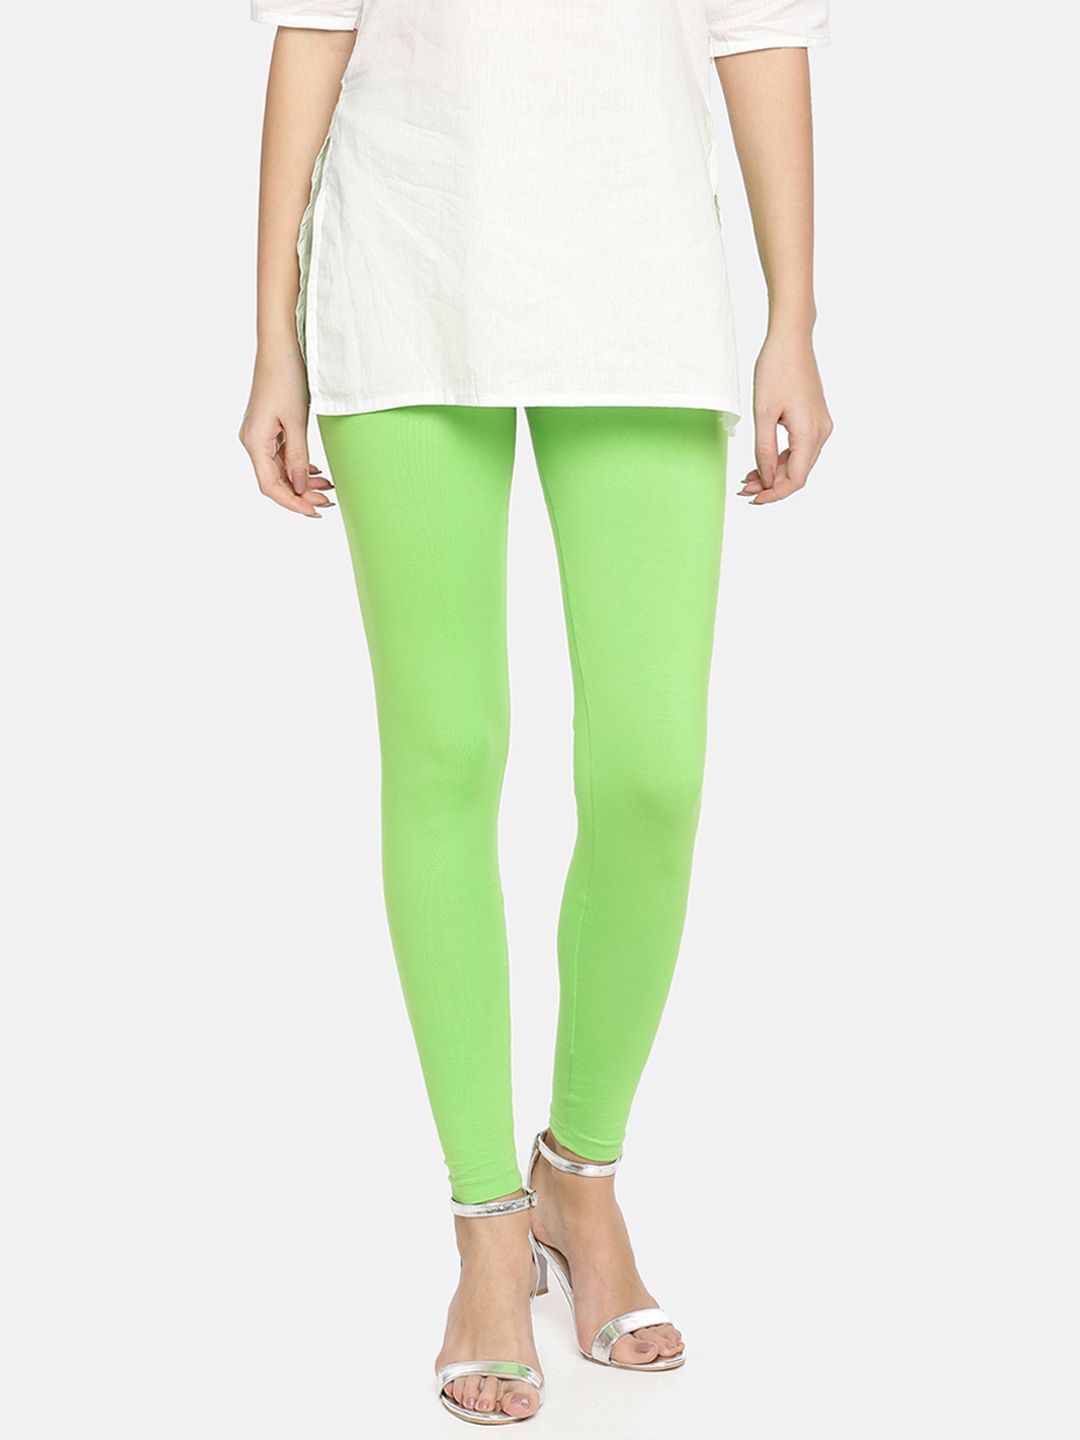 TWIN BIRDS Women Green Solid Ankle-Length Leggings Price in India